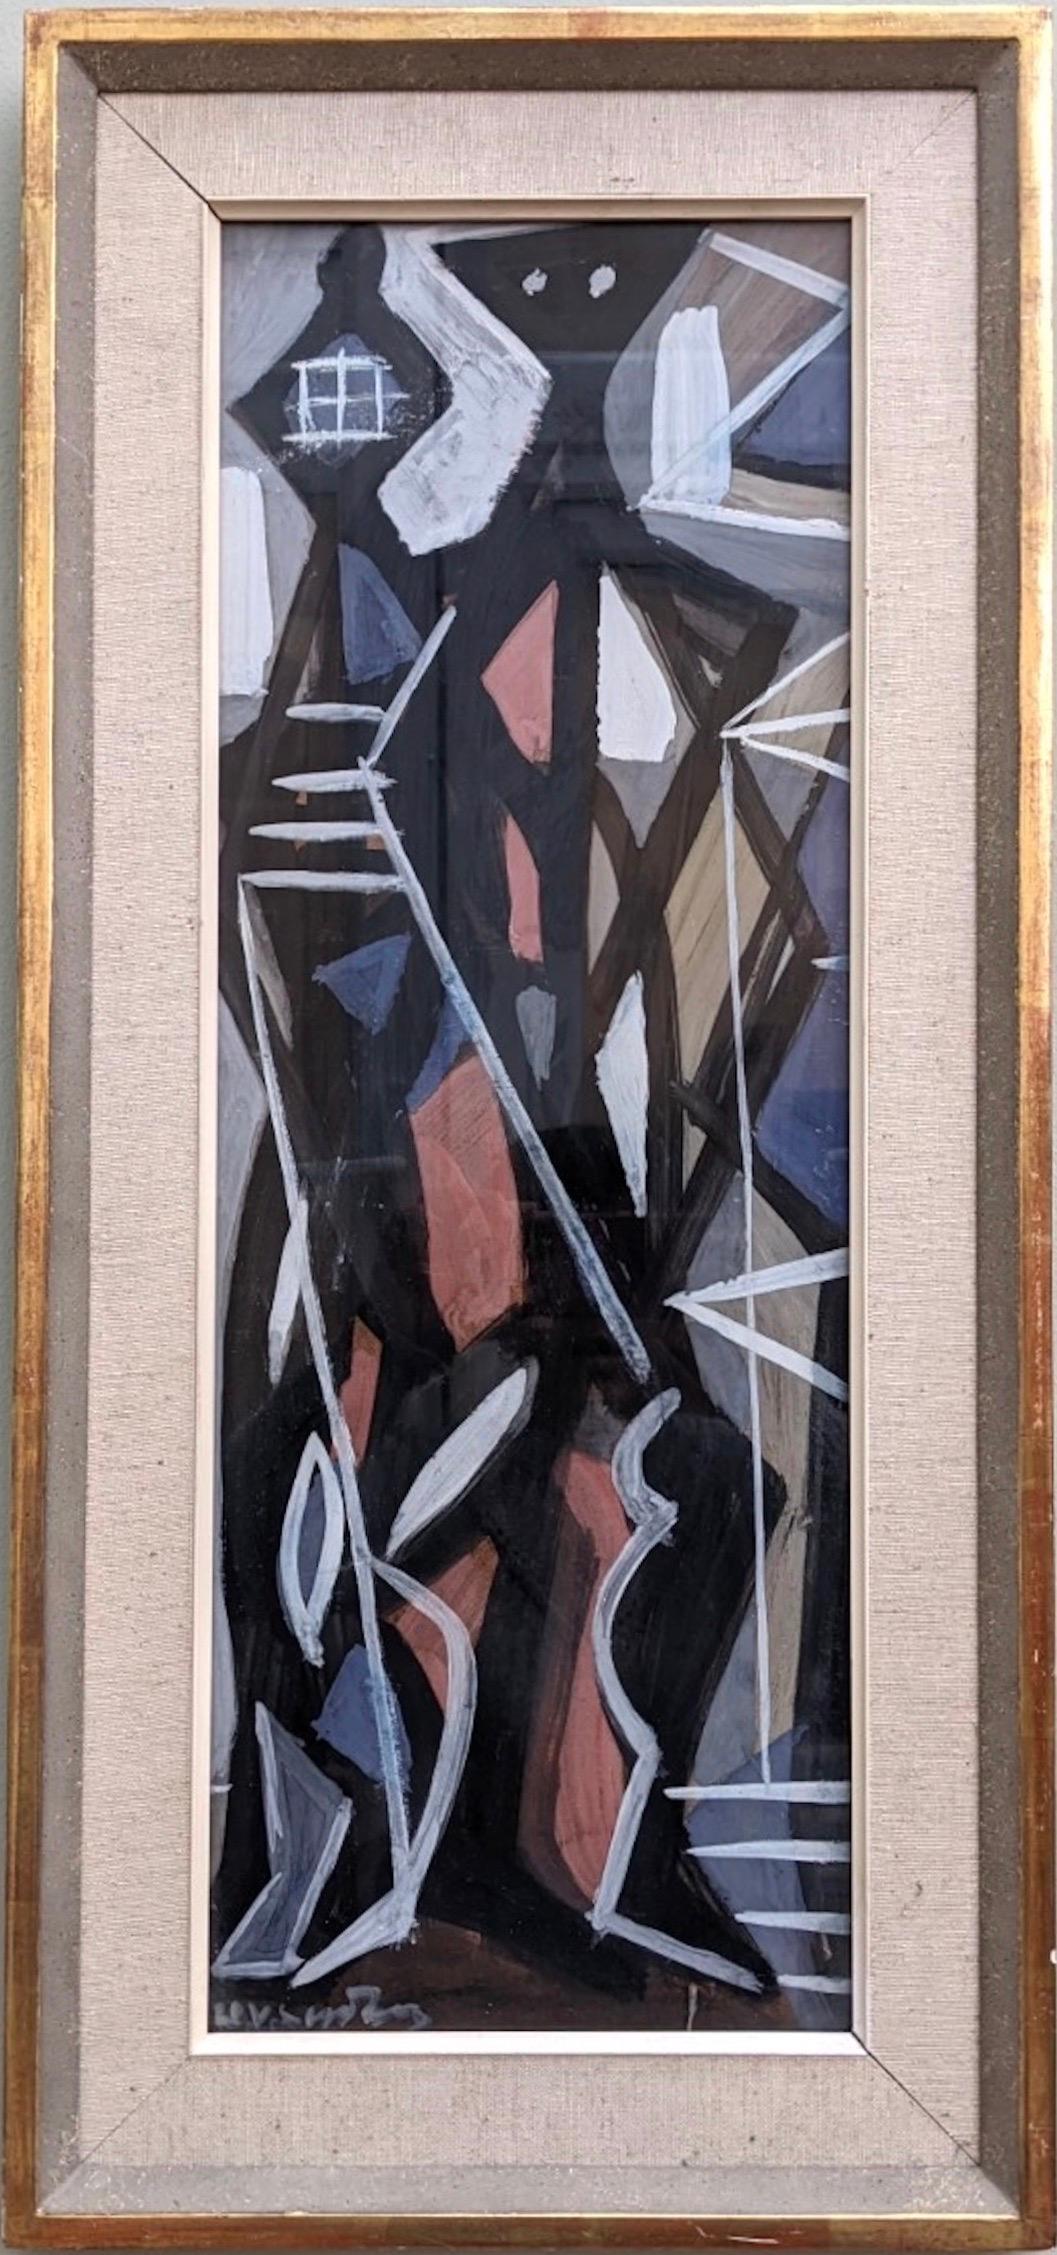 Unknown Abstract Painting - Vintage Mid-Century Modern Swedish Abstract Framed Painting - Geometric Figures